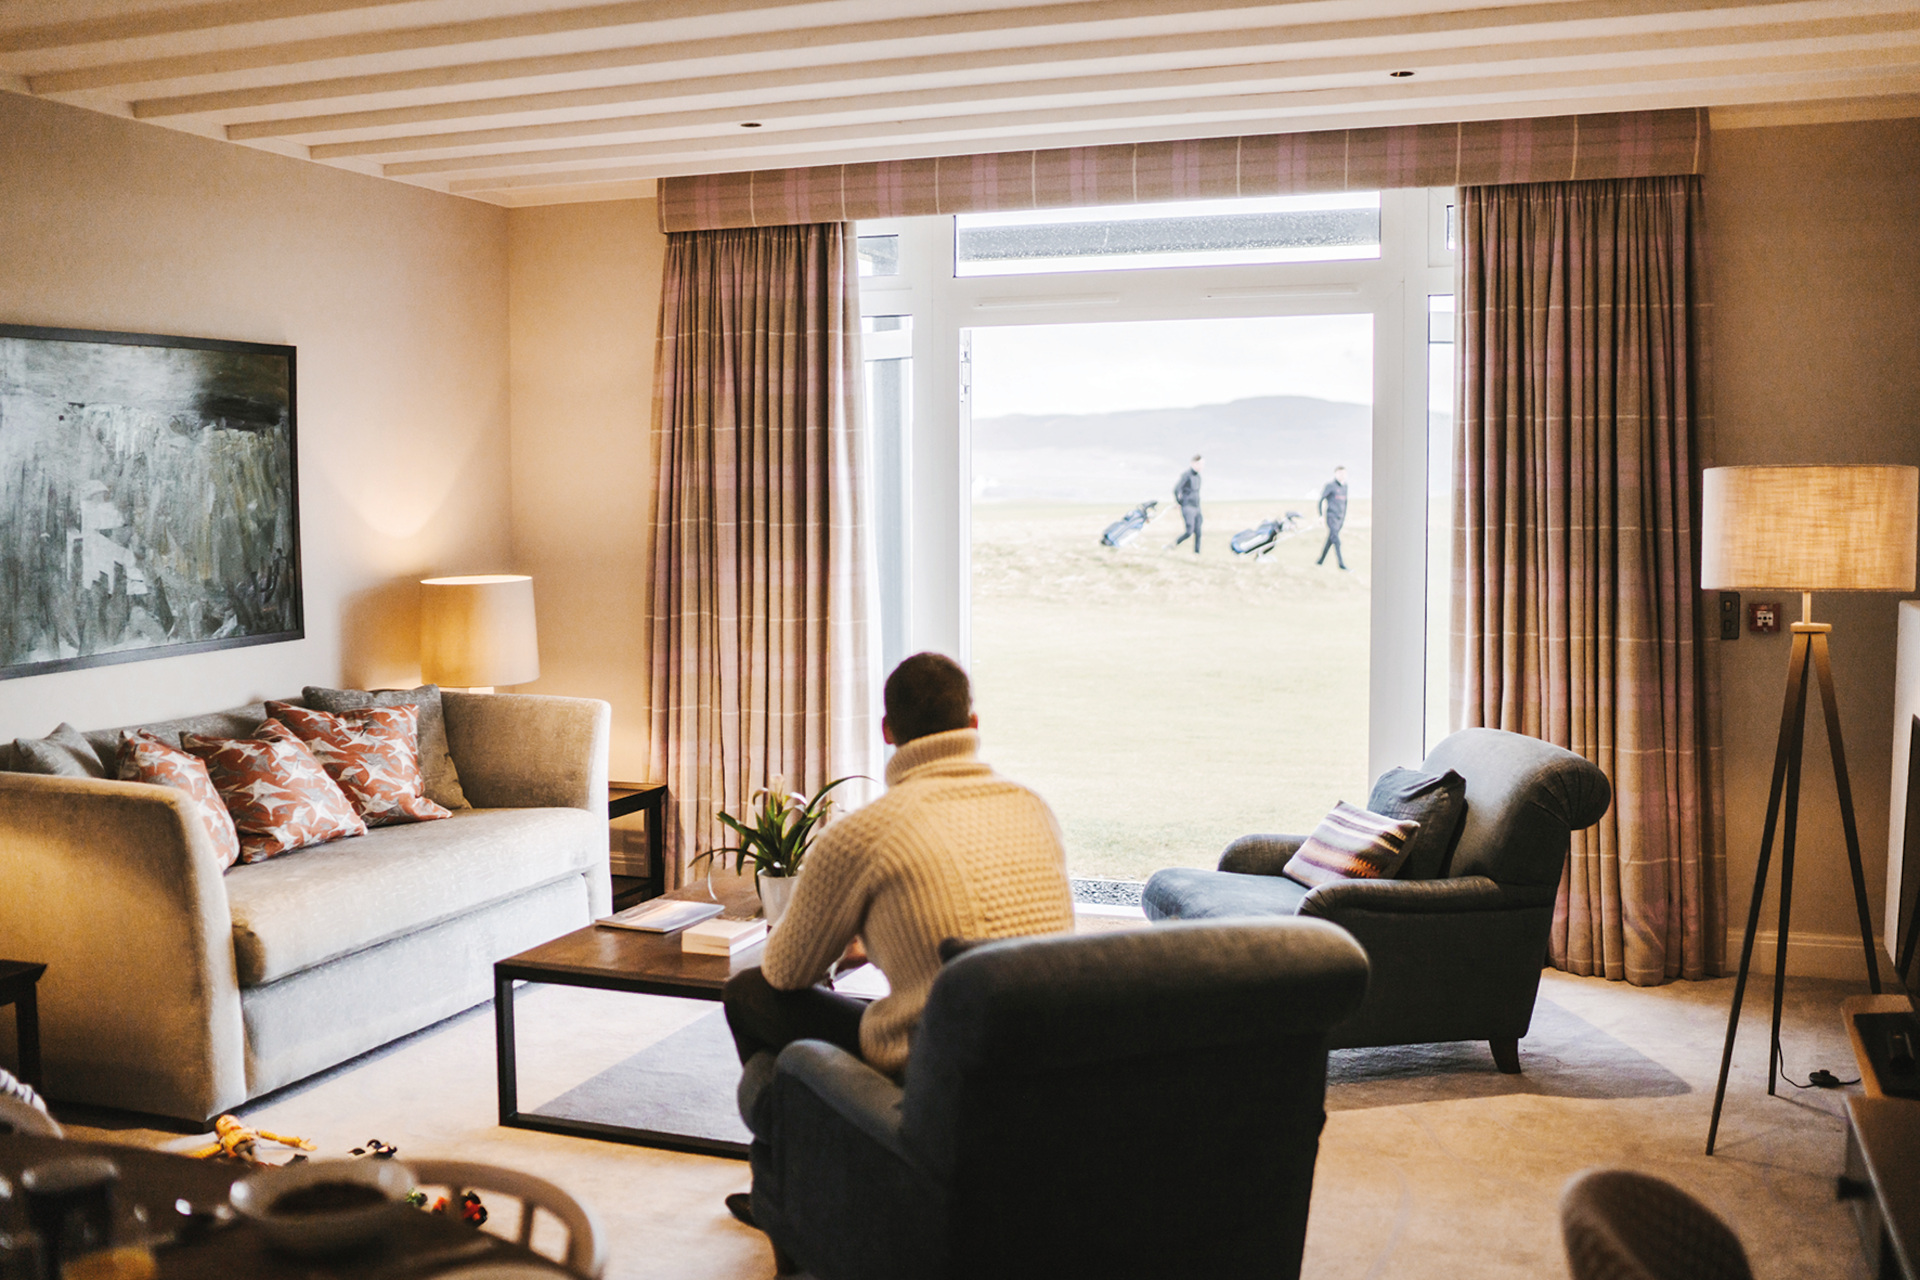 Man sat in hotel room with window look out onto people playing on golf course